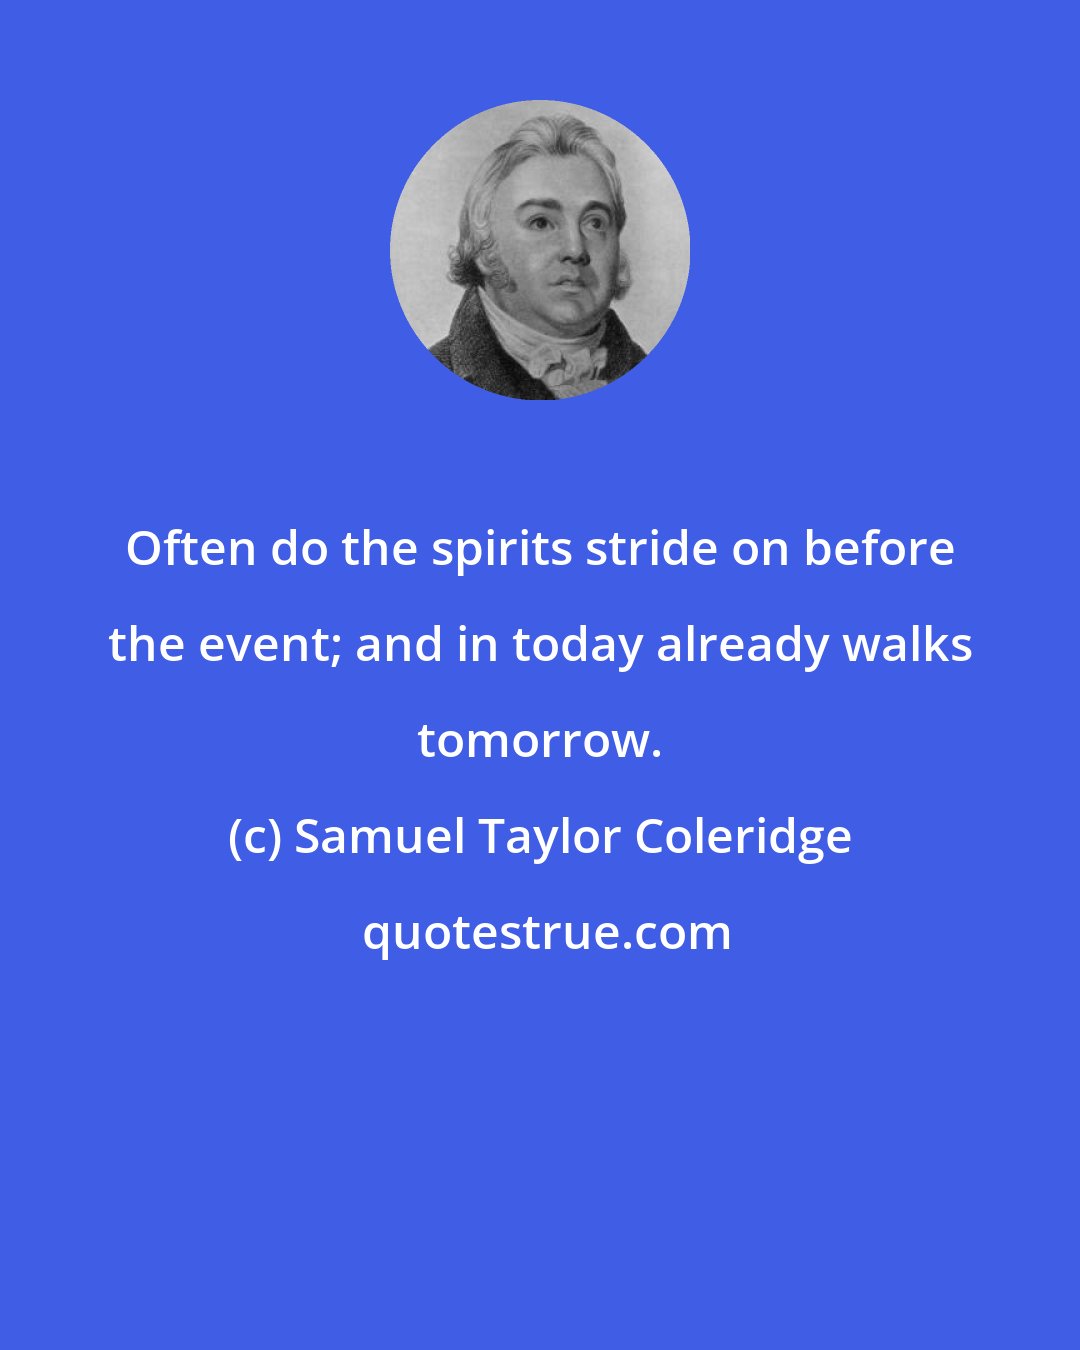 Samuel Taylor Coleridge: Often do the spirits stride on before the event; and in today already walks tomorrow.